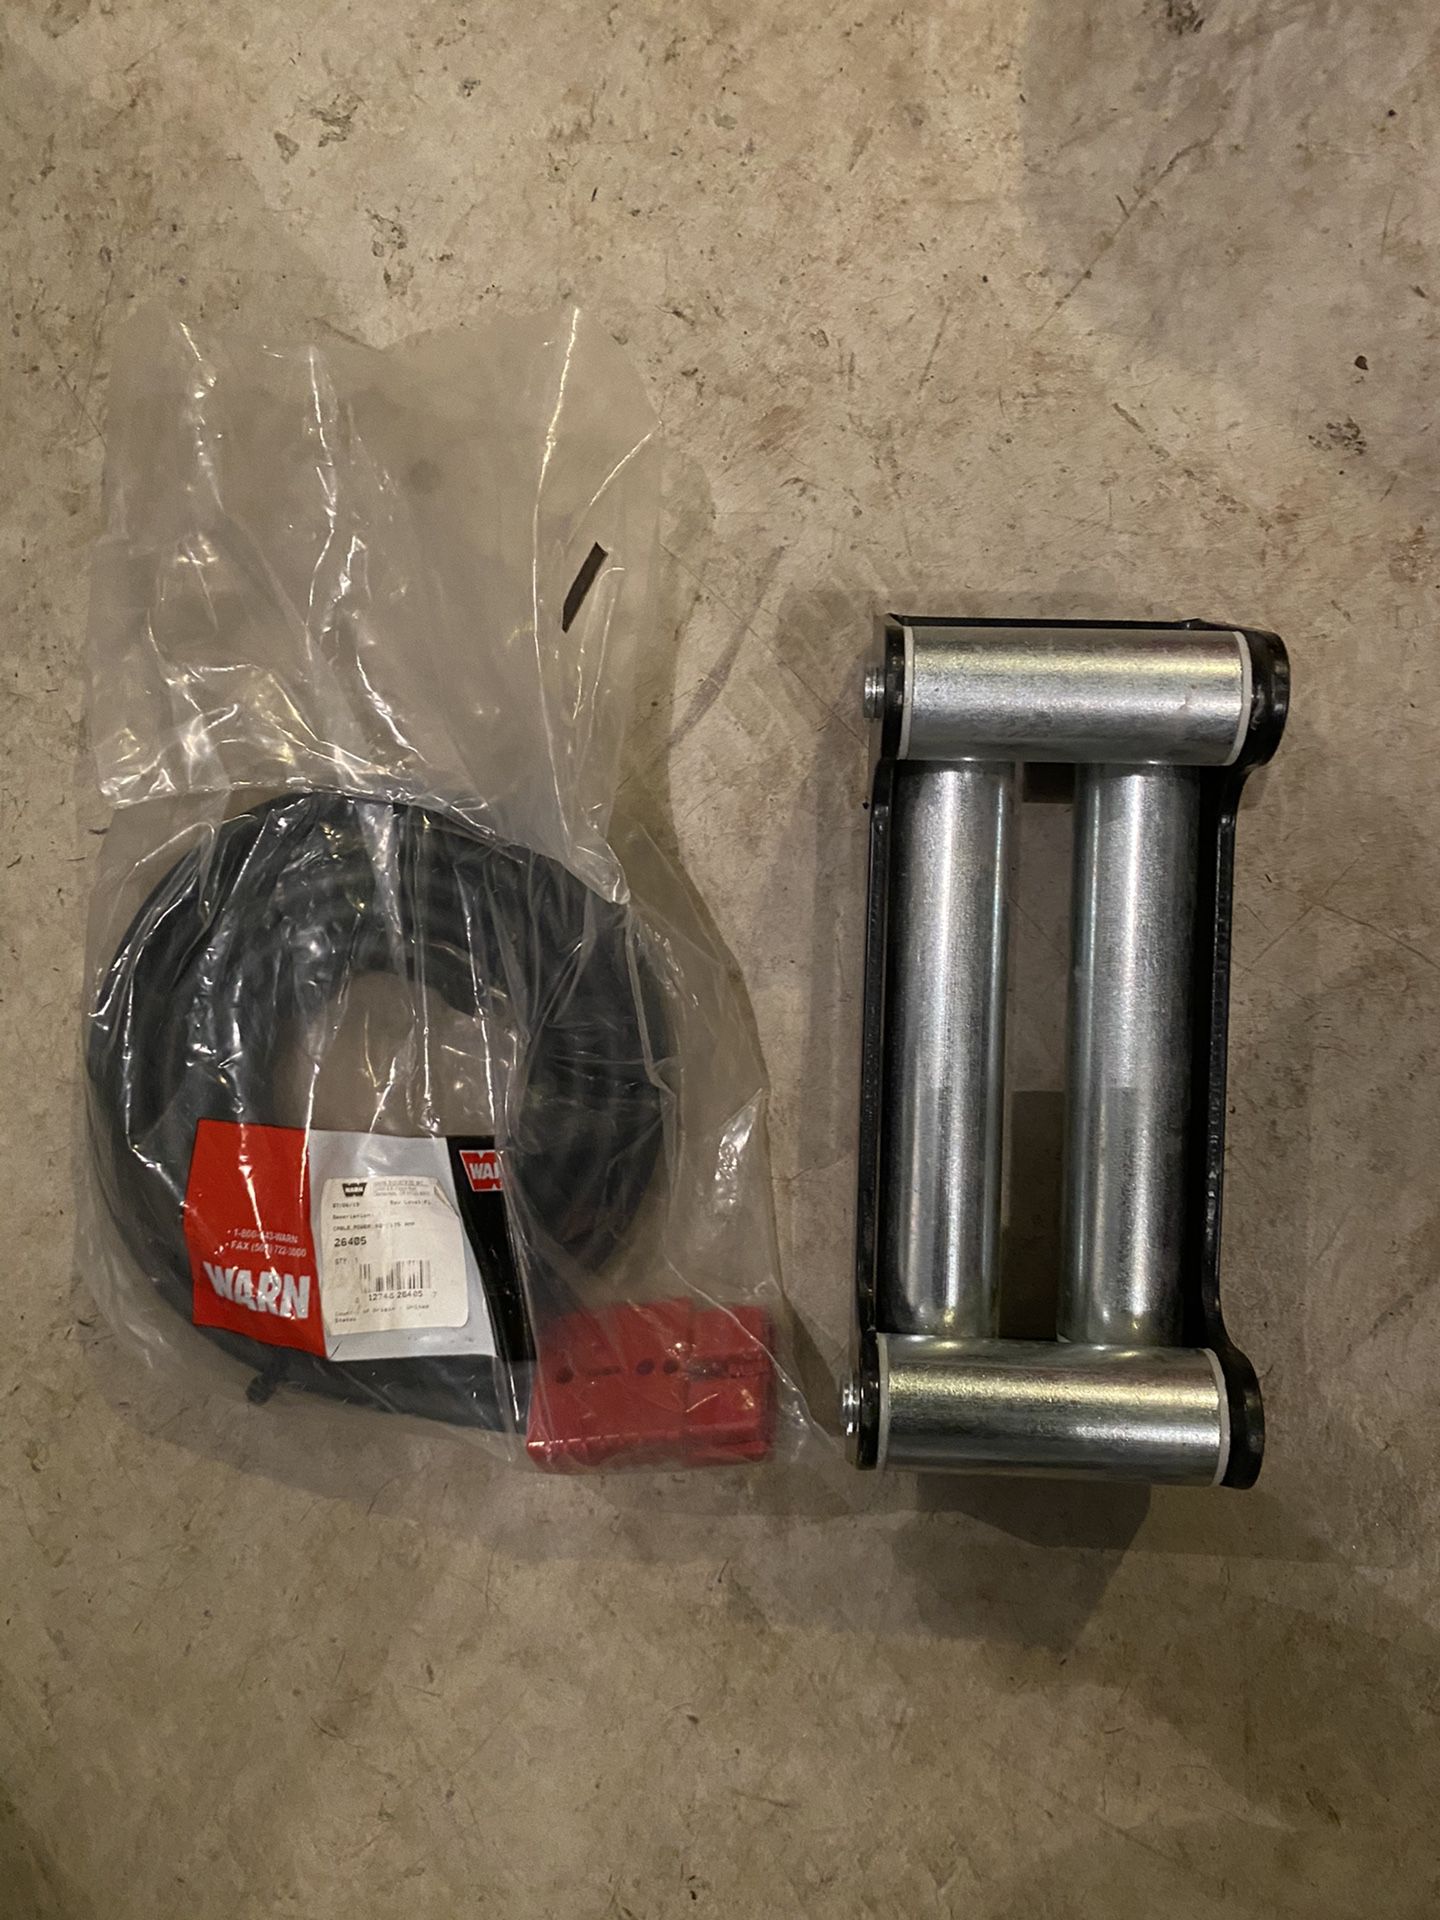 Brand new warn quick connect power cable and brand new fairlead